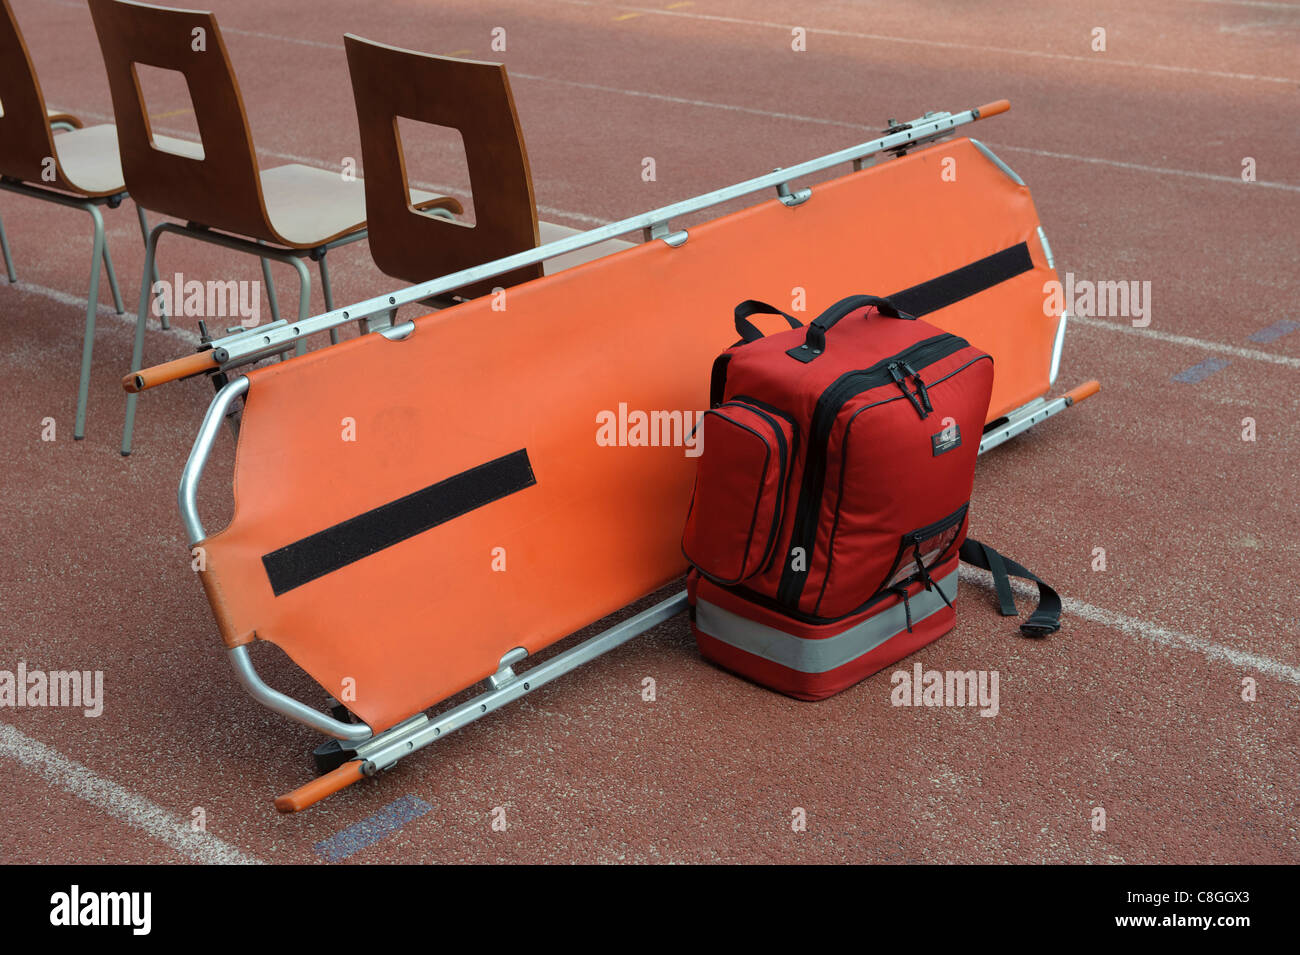 Stretcher and first aid backpack at sporting event Stock Photo